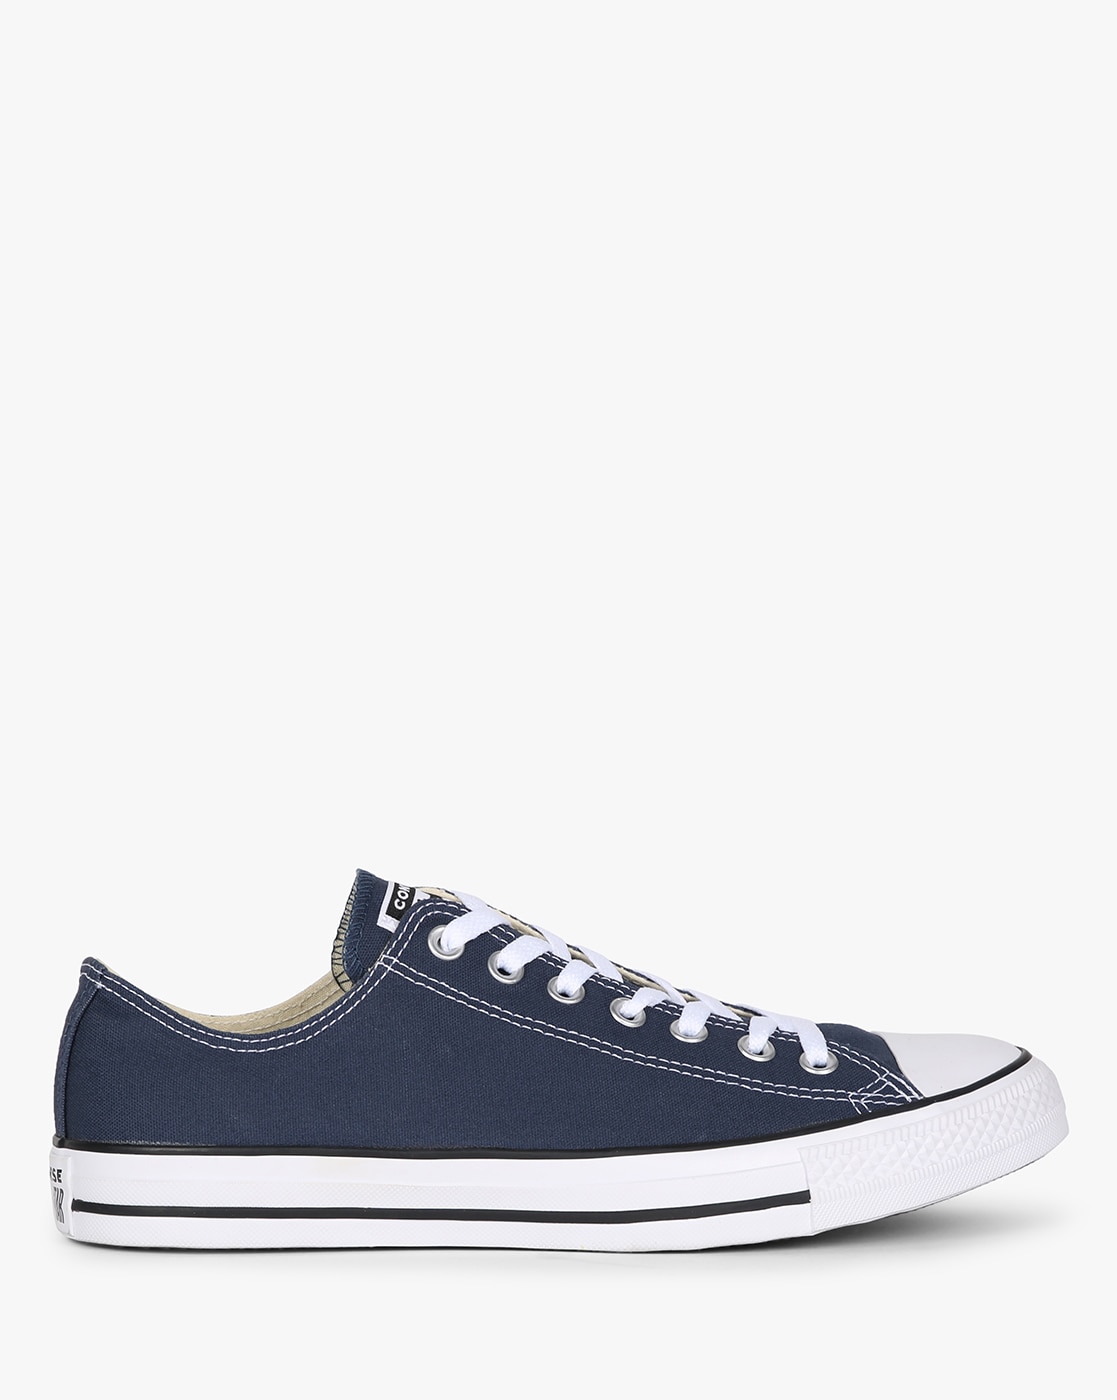 Buy Yellow Casual Shoes for Men by CONVERSE Online | Ajio.com